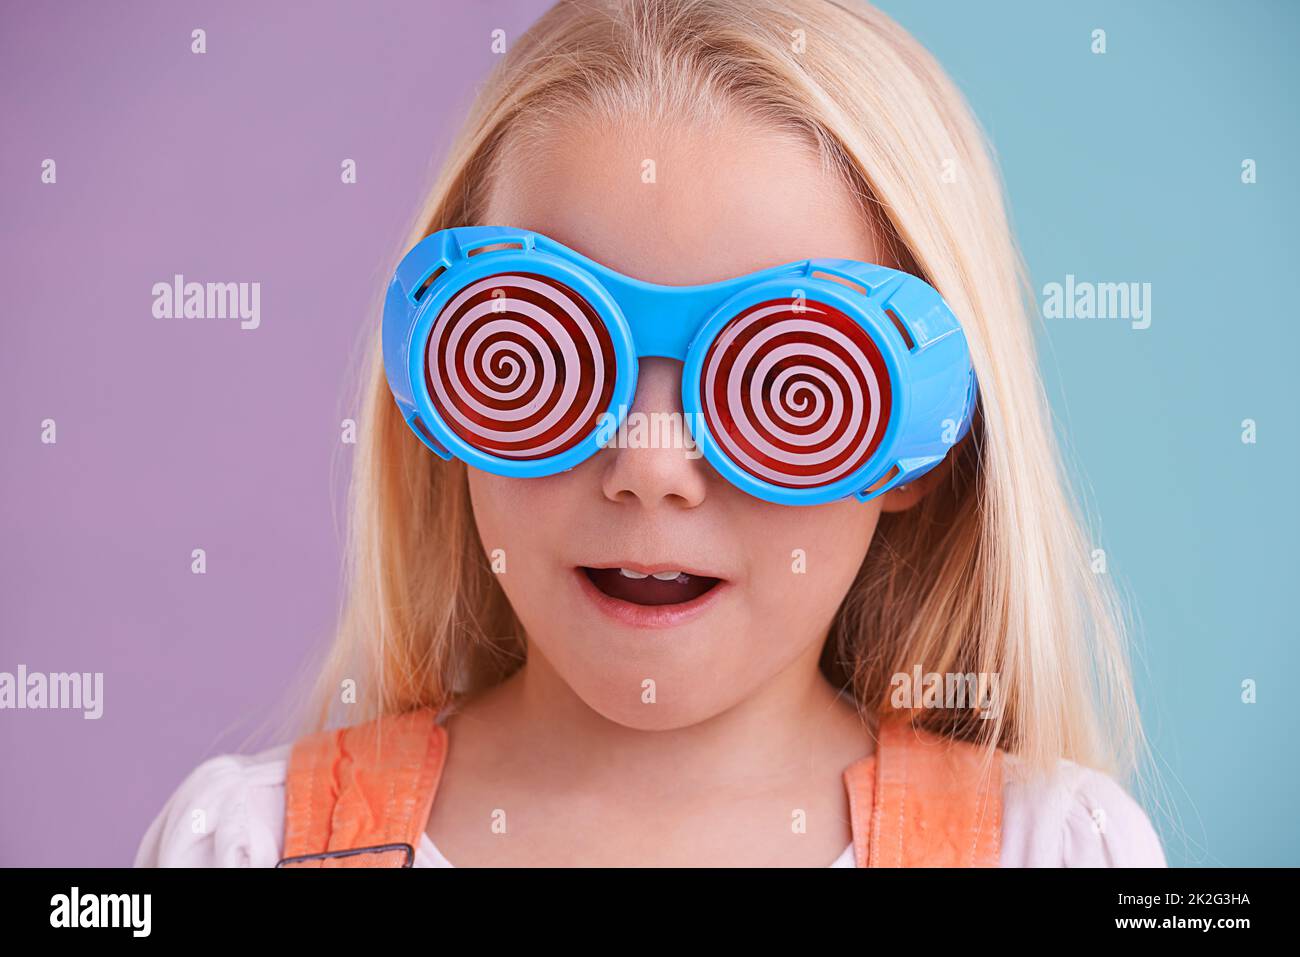 Going crazeeee. A cute little girl wearing funny sunglasses against a colorful background. Stock Photo